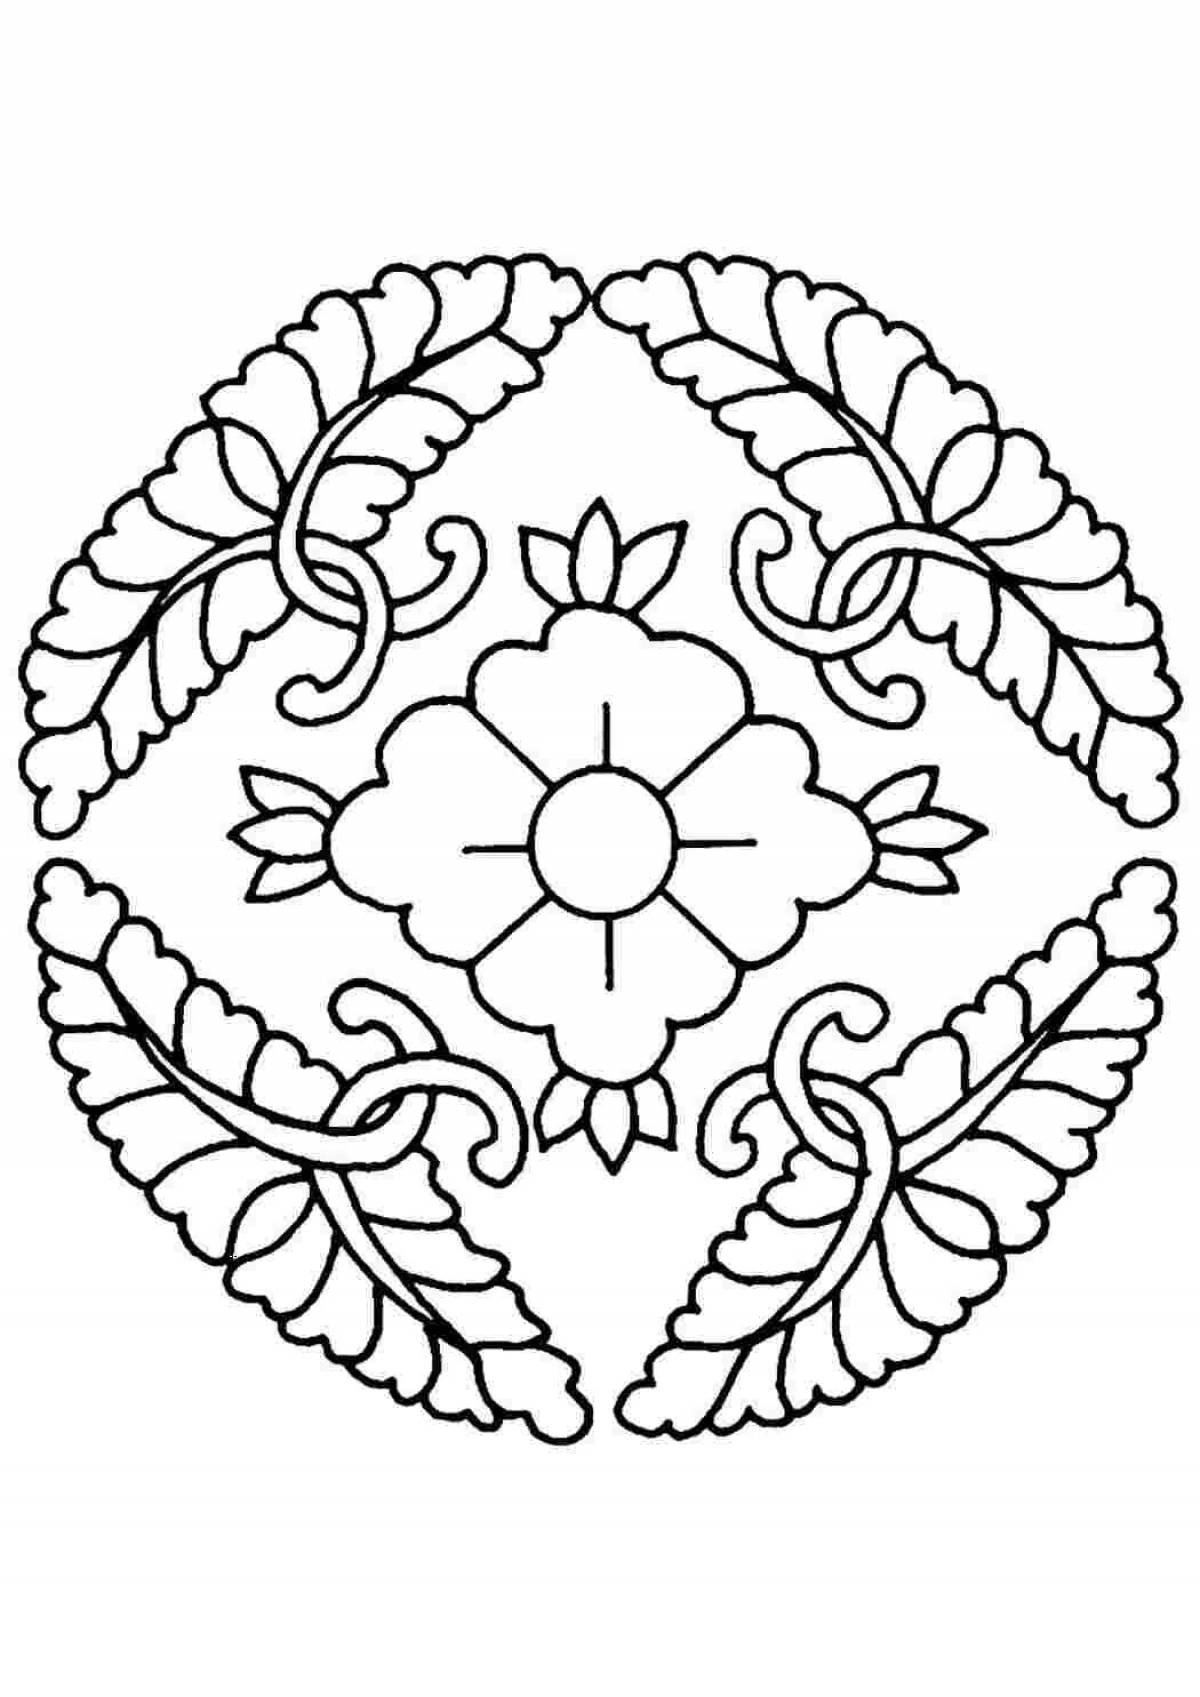 Coloring page unusual tatar patterns